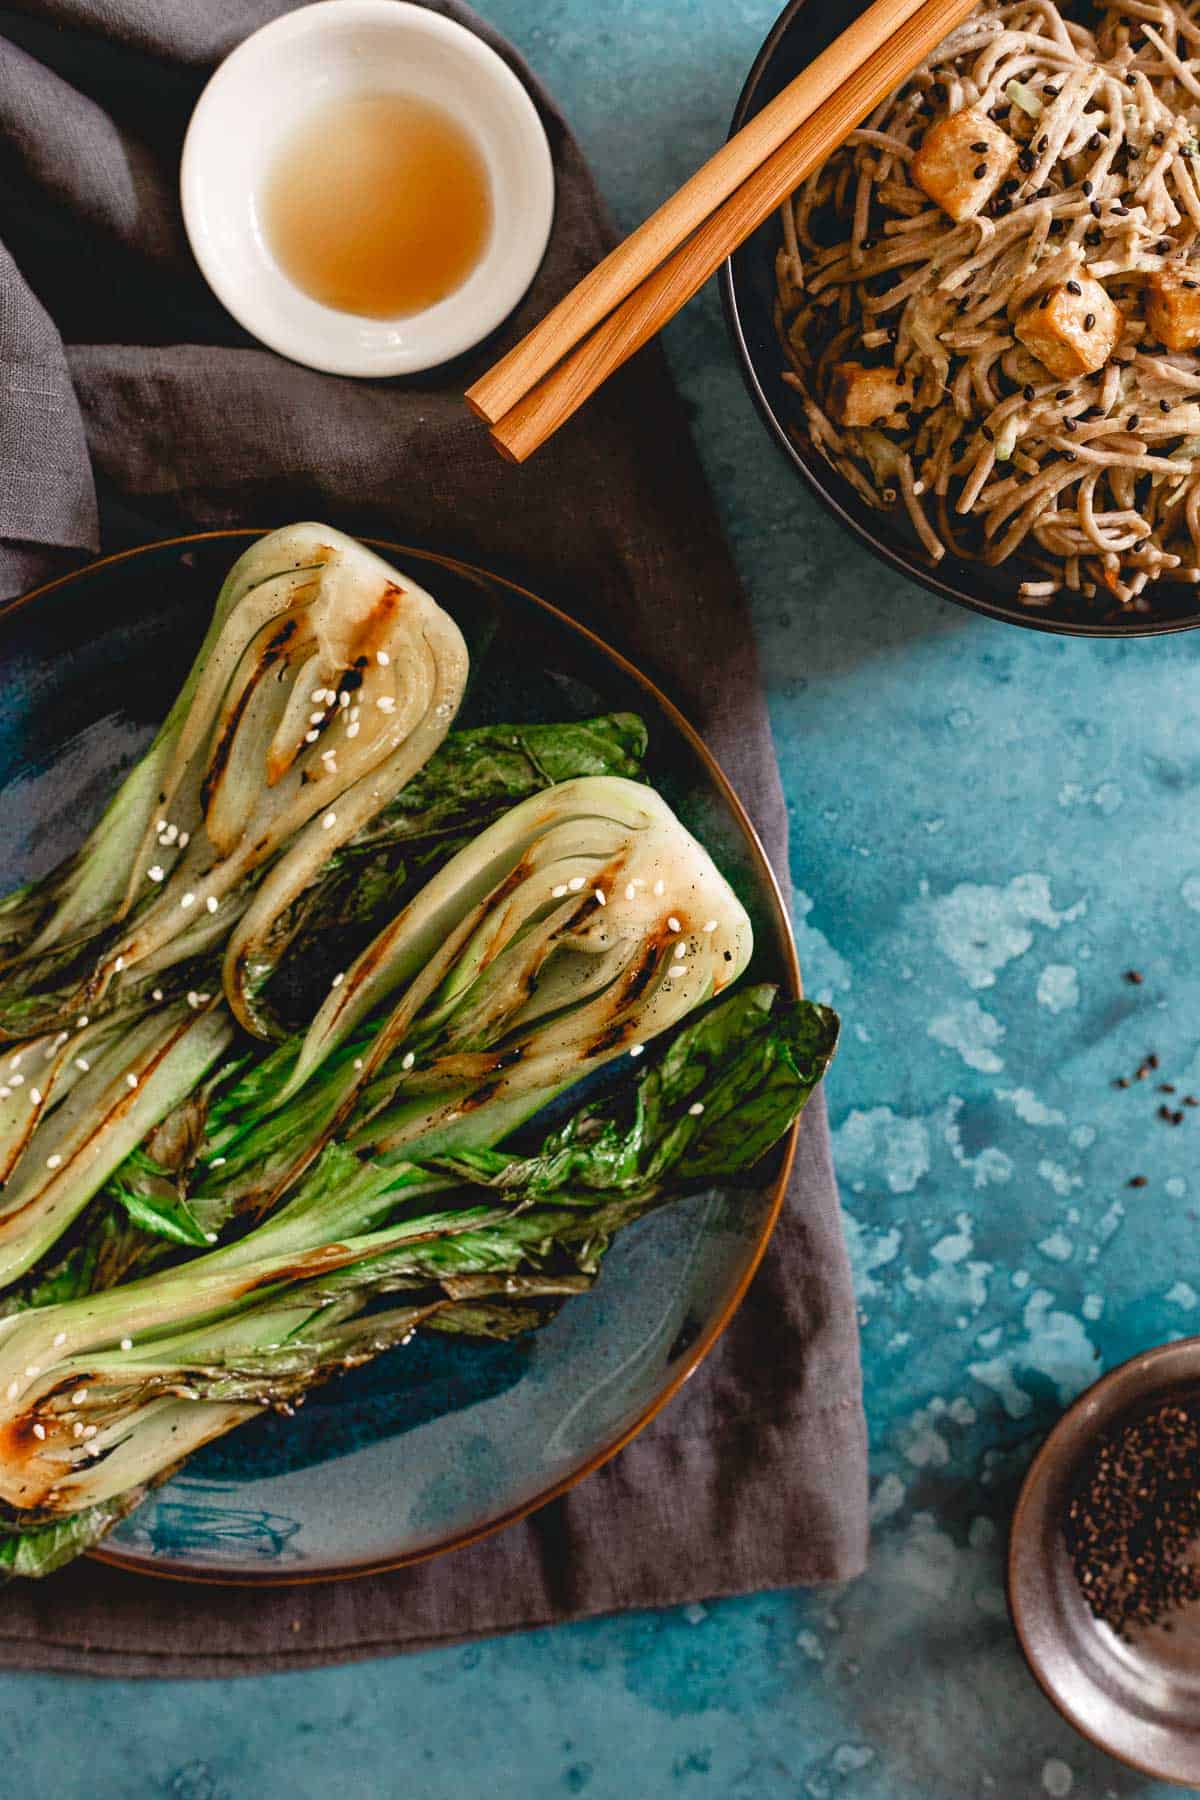 Veestro's soba noodles with peanut sauce are perfectly accompanied with some simple Asian inspired grilled baby bok choy to round out the meal.